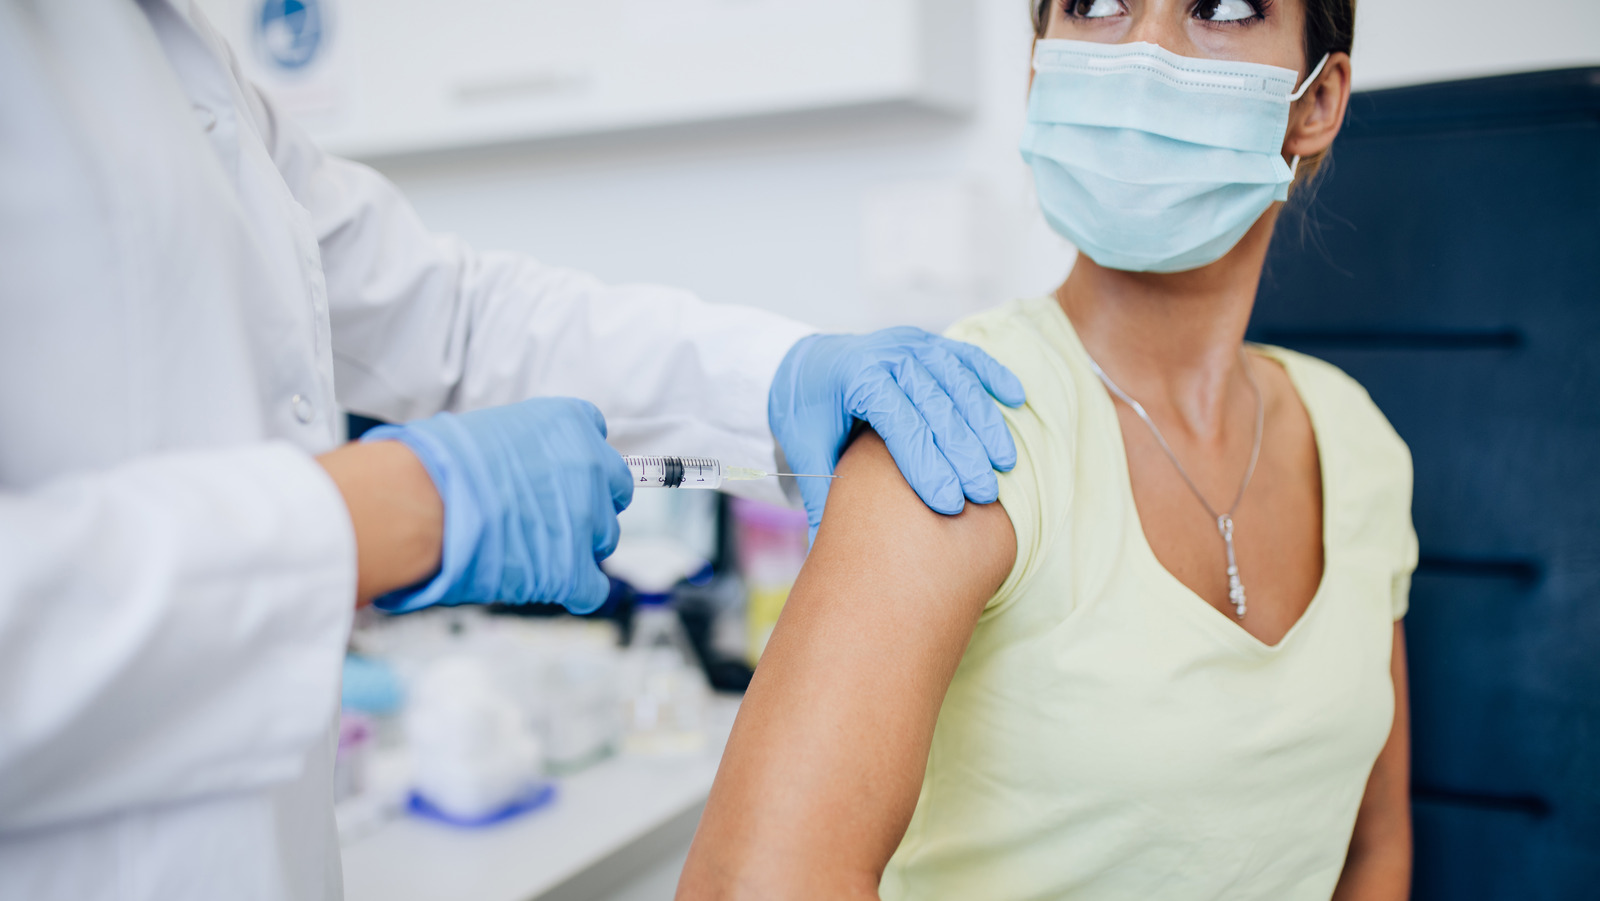 Is it possible to get the flu shot?